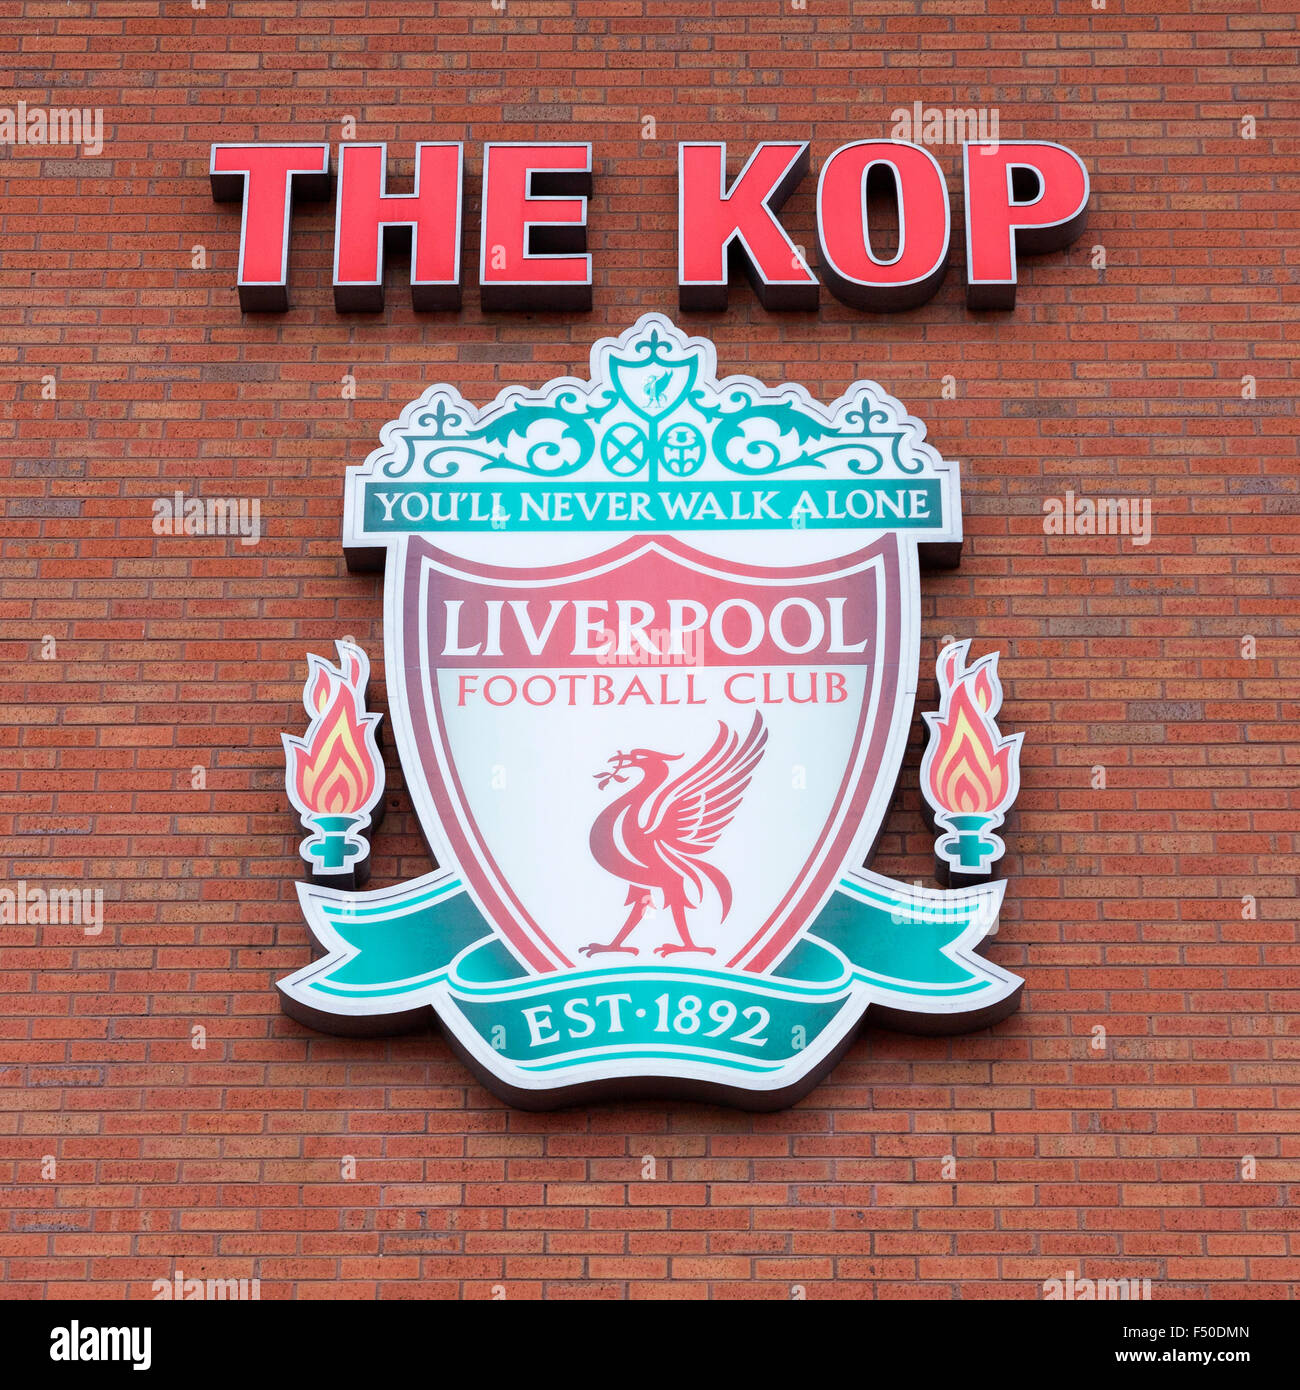 The Kop sign, Anfield Football Club, Liverpool, UK Stock Photo